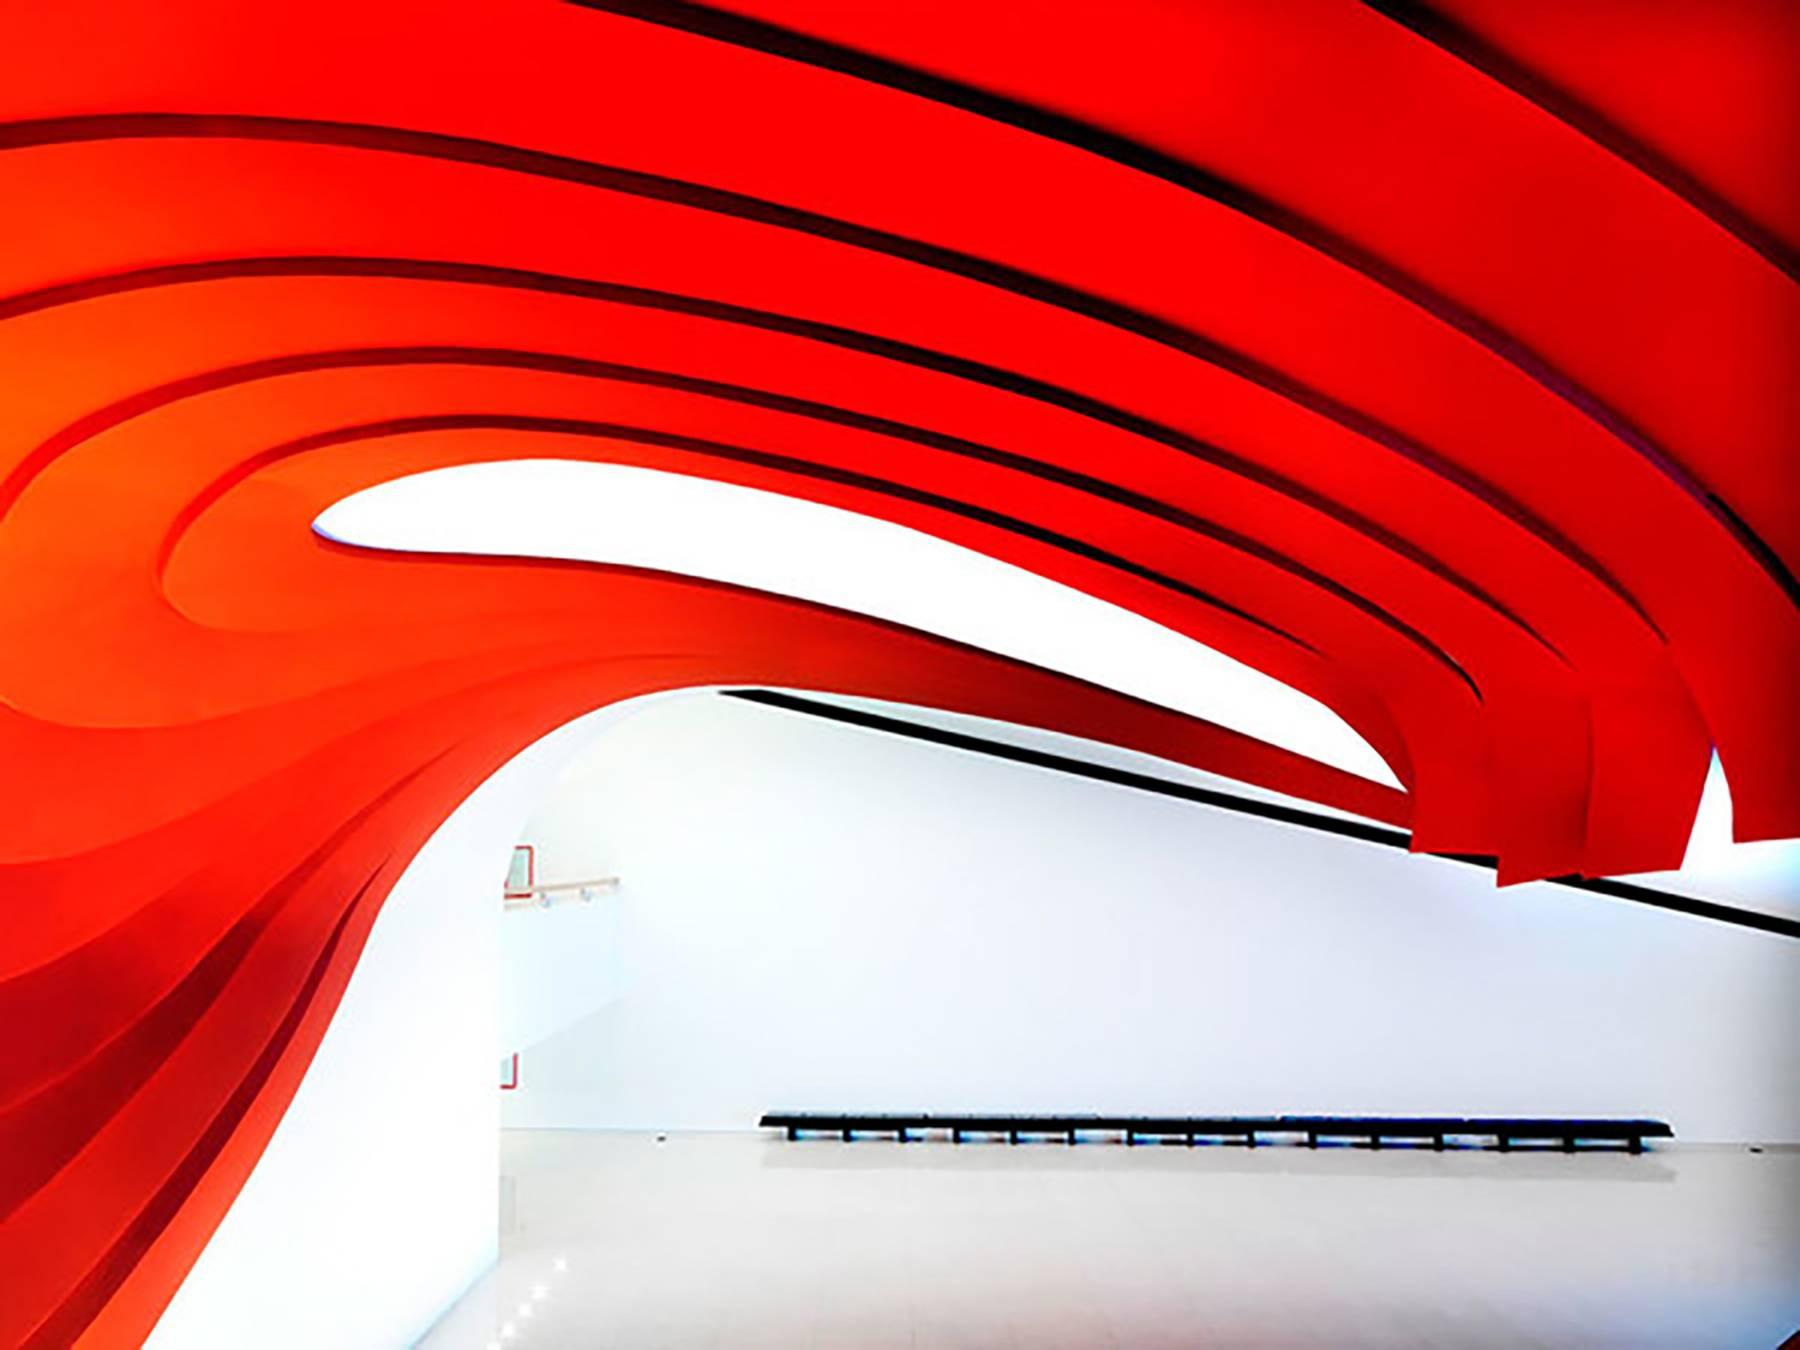 Incredible photograph taken by the master of interiors photography, Massimo Listri, one from his Niemeyer series, showcasing the stunning Ibirapuera Auditroium in Sao Paolo, Brazil. This photograph is from a series of only 5 images and along with